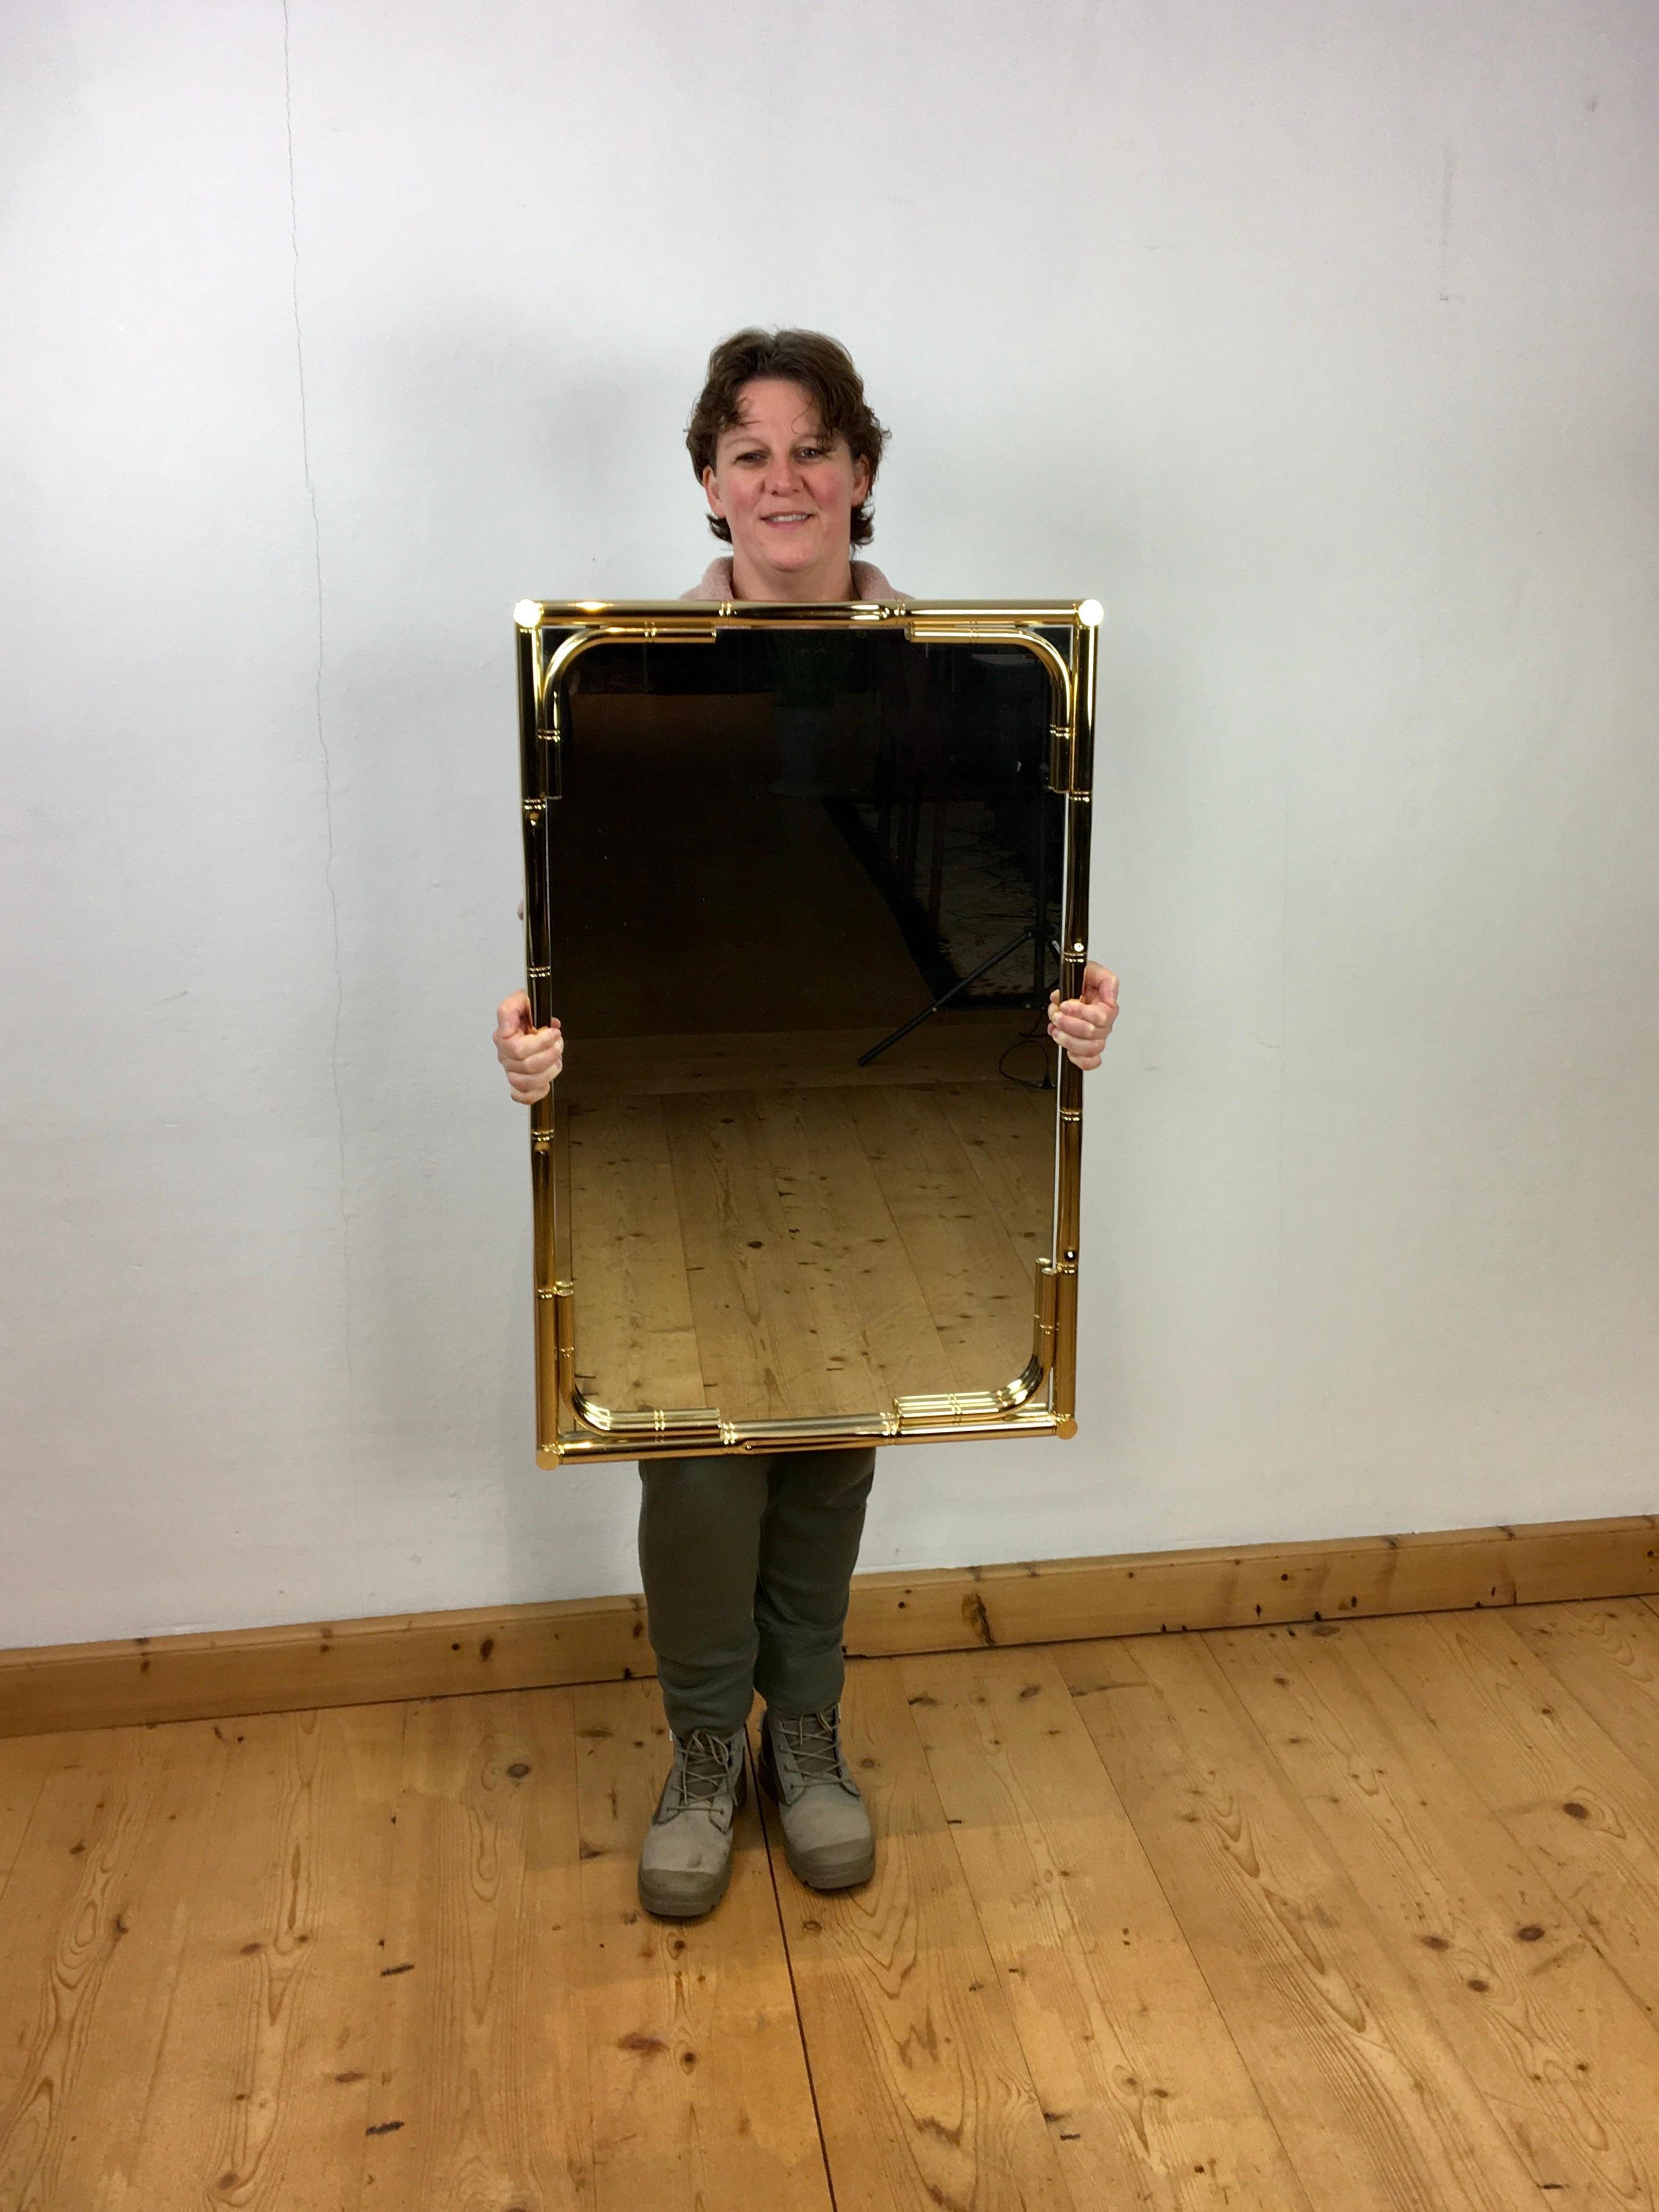 Faux bamboo wall mirror, Made in Italy. 
This Hollywood Regency mirror has a gilt metal faux bamboo frame around the mirror glas. It's a beautiful mirror which was made in Italy in the 1970s, with a beautiful Italian design. 
It's a stylish, elegant